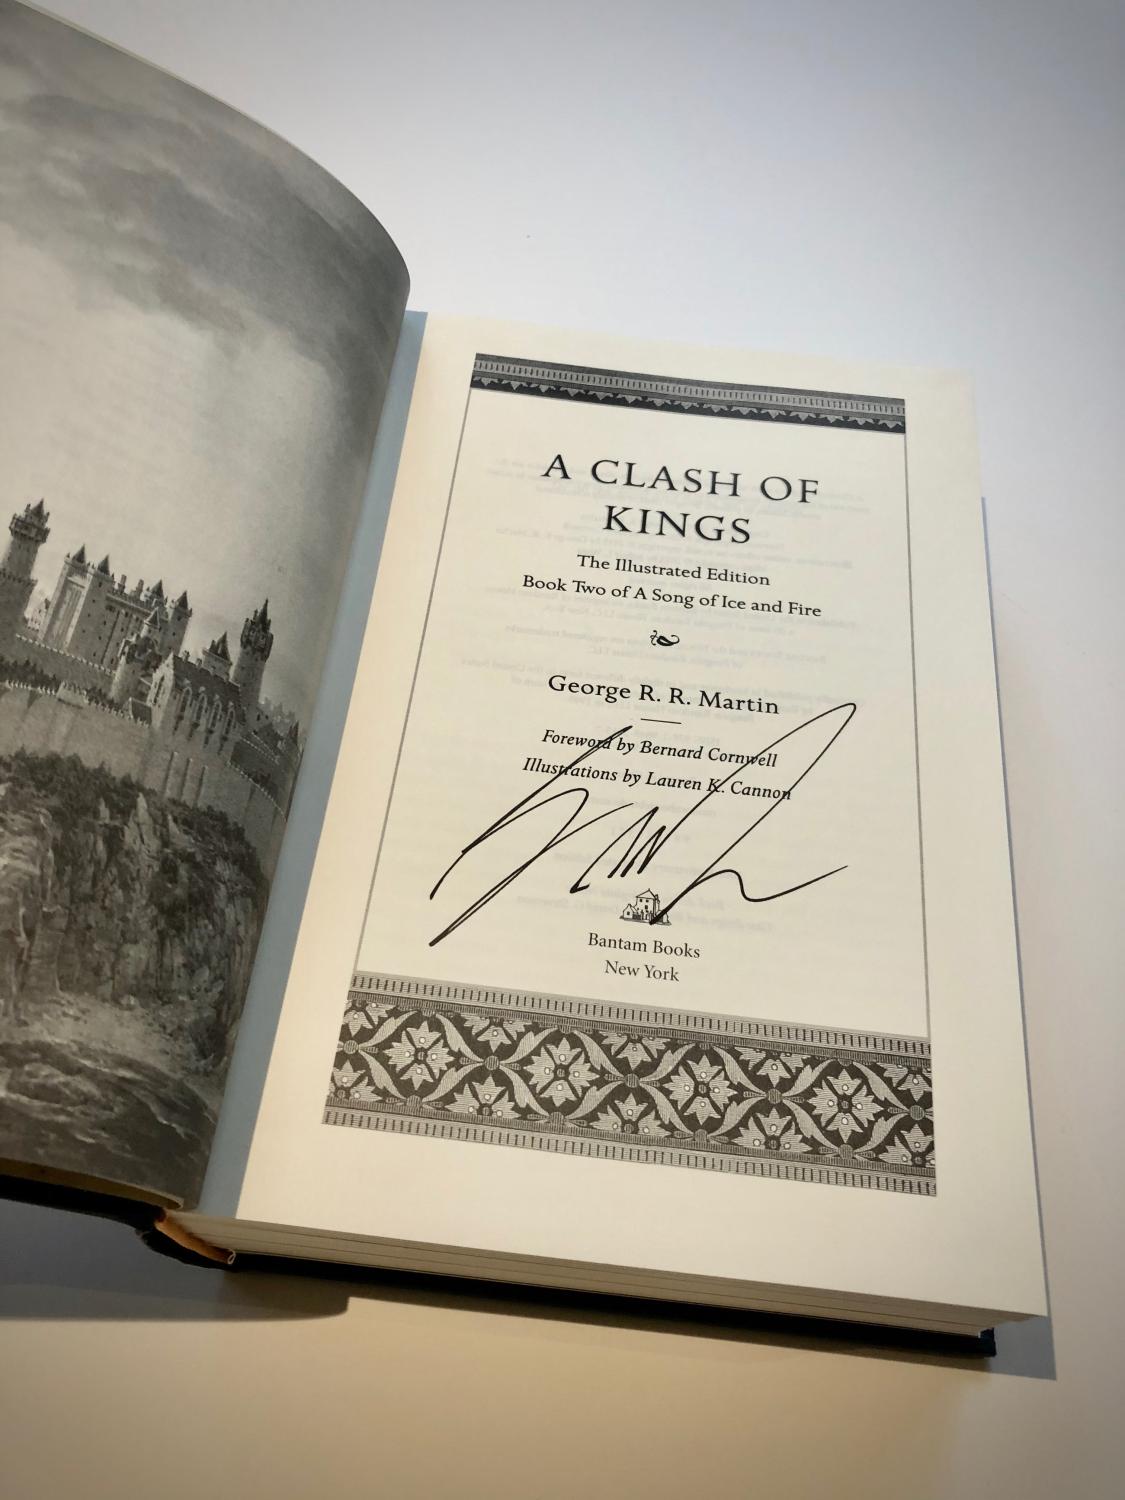 A Clash of Kings: The Illustrated Edition - (A Song of Ice and Fire  Illustrated Edition) by George R R Martin (Hardcover)